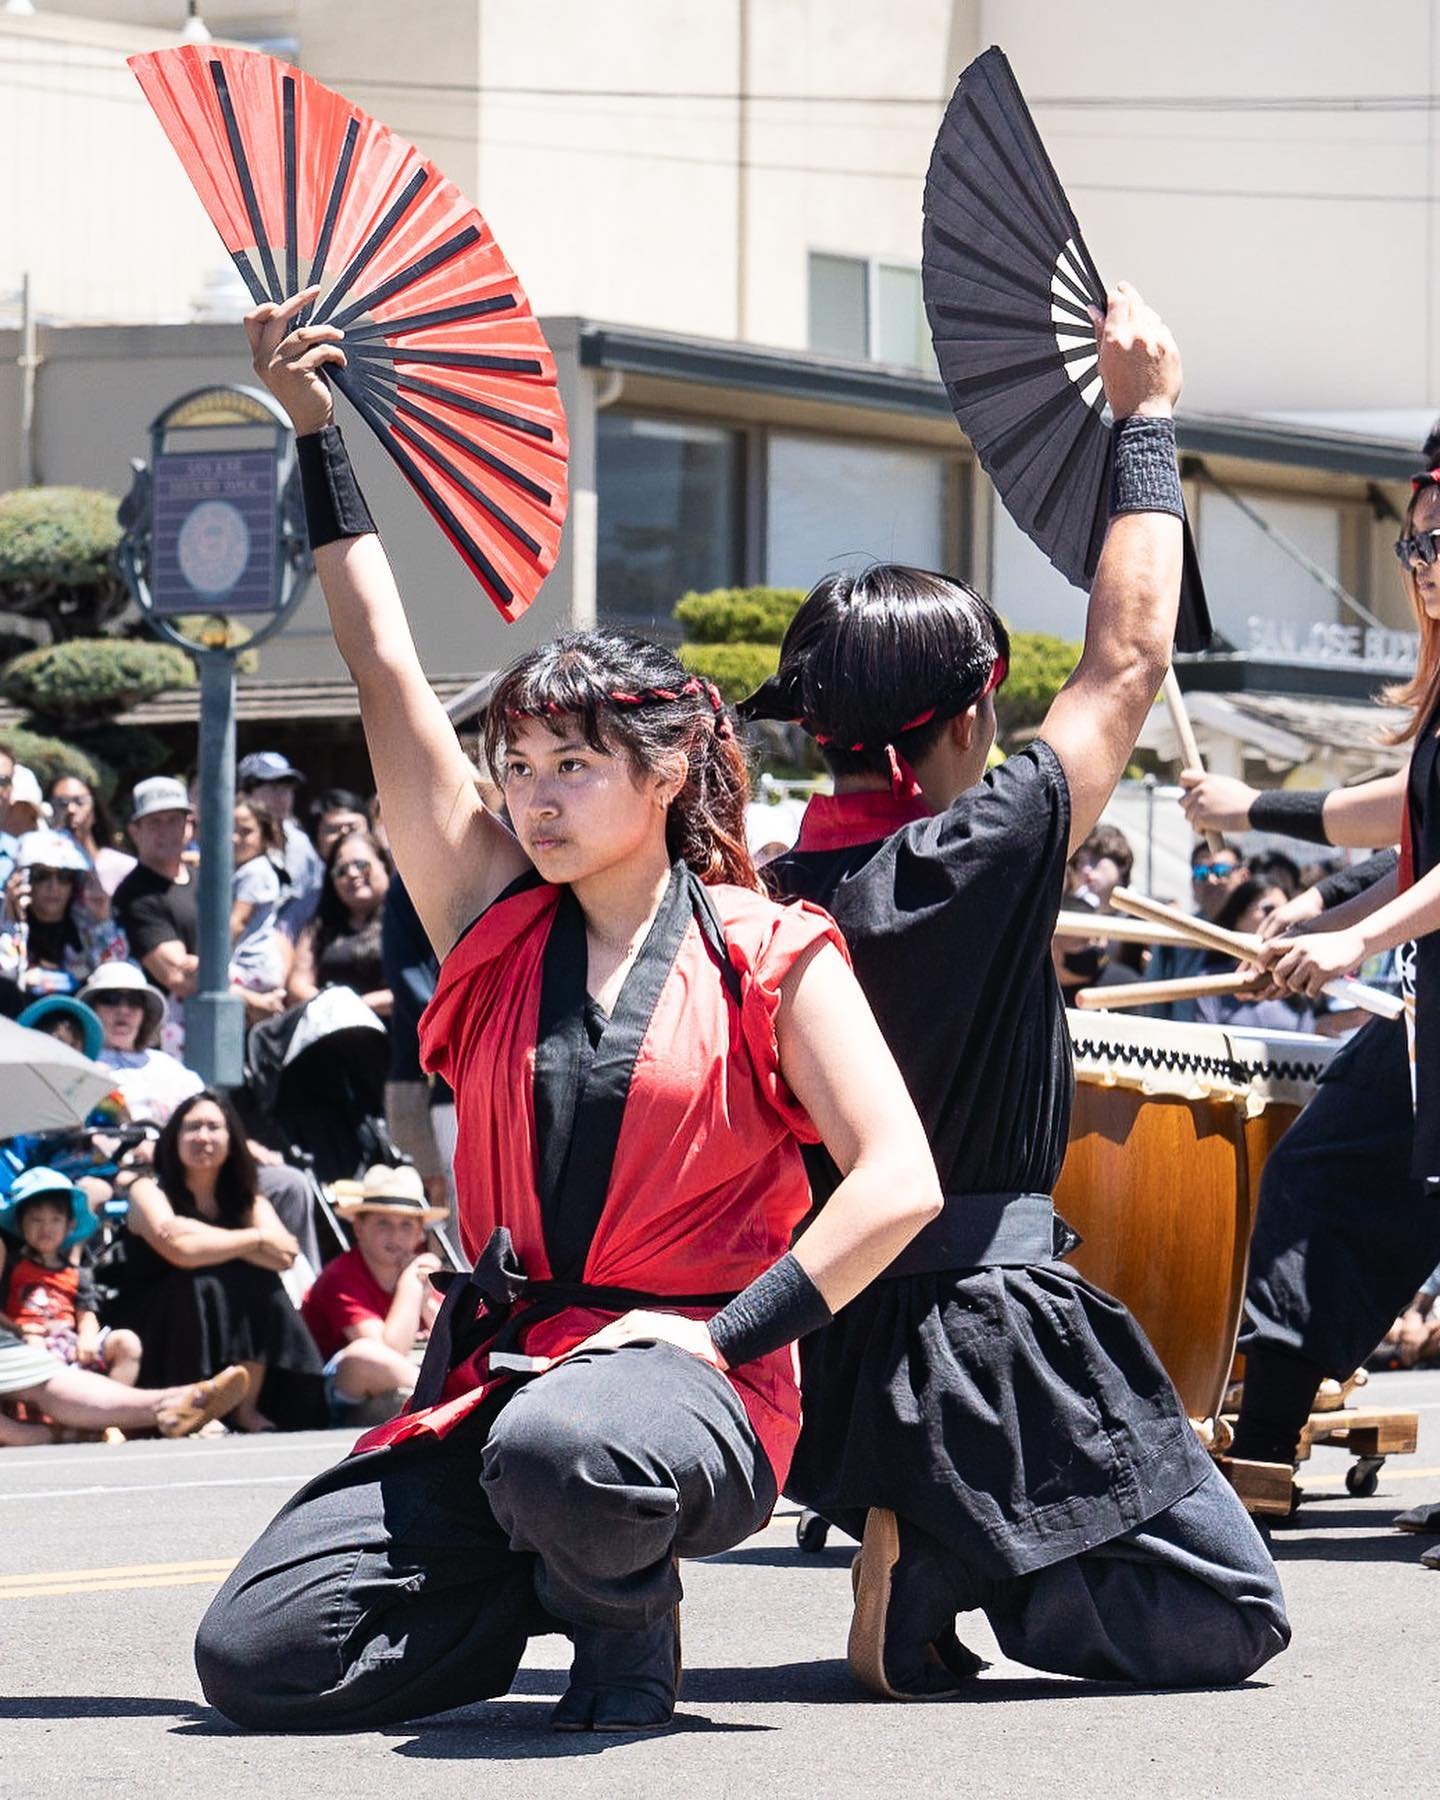 Calling all collegiate taiko groups! San Jose Obon has had collegiate taiko groups as part of the festival entertainment for over 20 years. Each year, the San Jose Buddhist Church Betsuin asks San Jose Taiko to curate a number of collegiate taiko gro